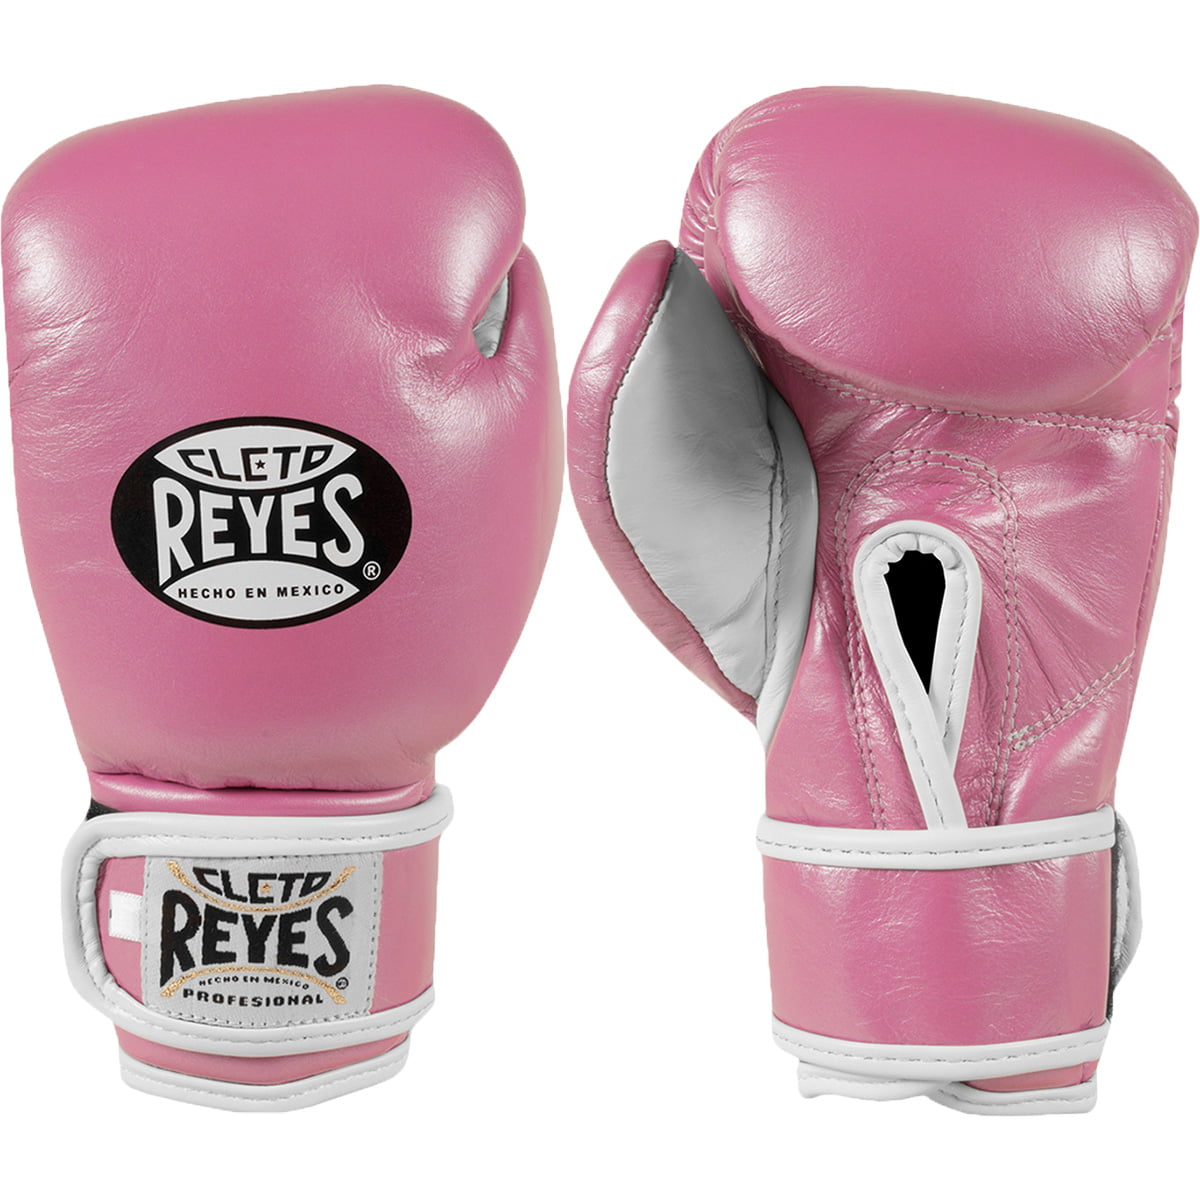 Cleto Reyes Training Boxing Sparring Gloves Pink Lady Pure Leather Free Shipping 